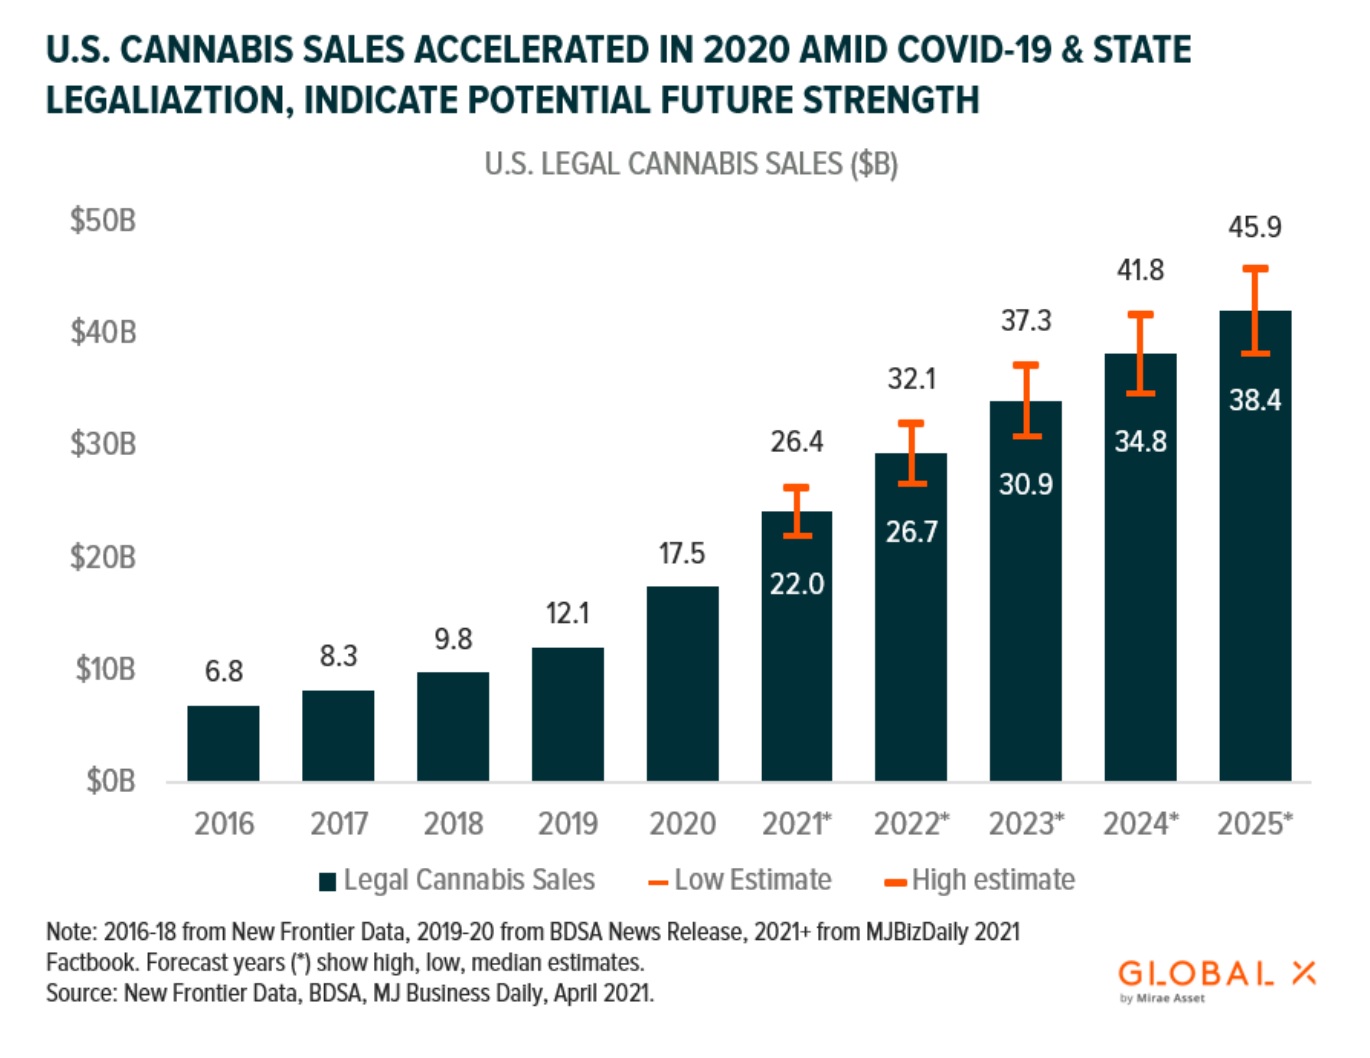 US retail cannabis sales continue to increase